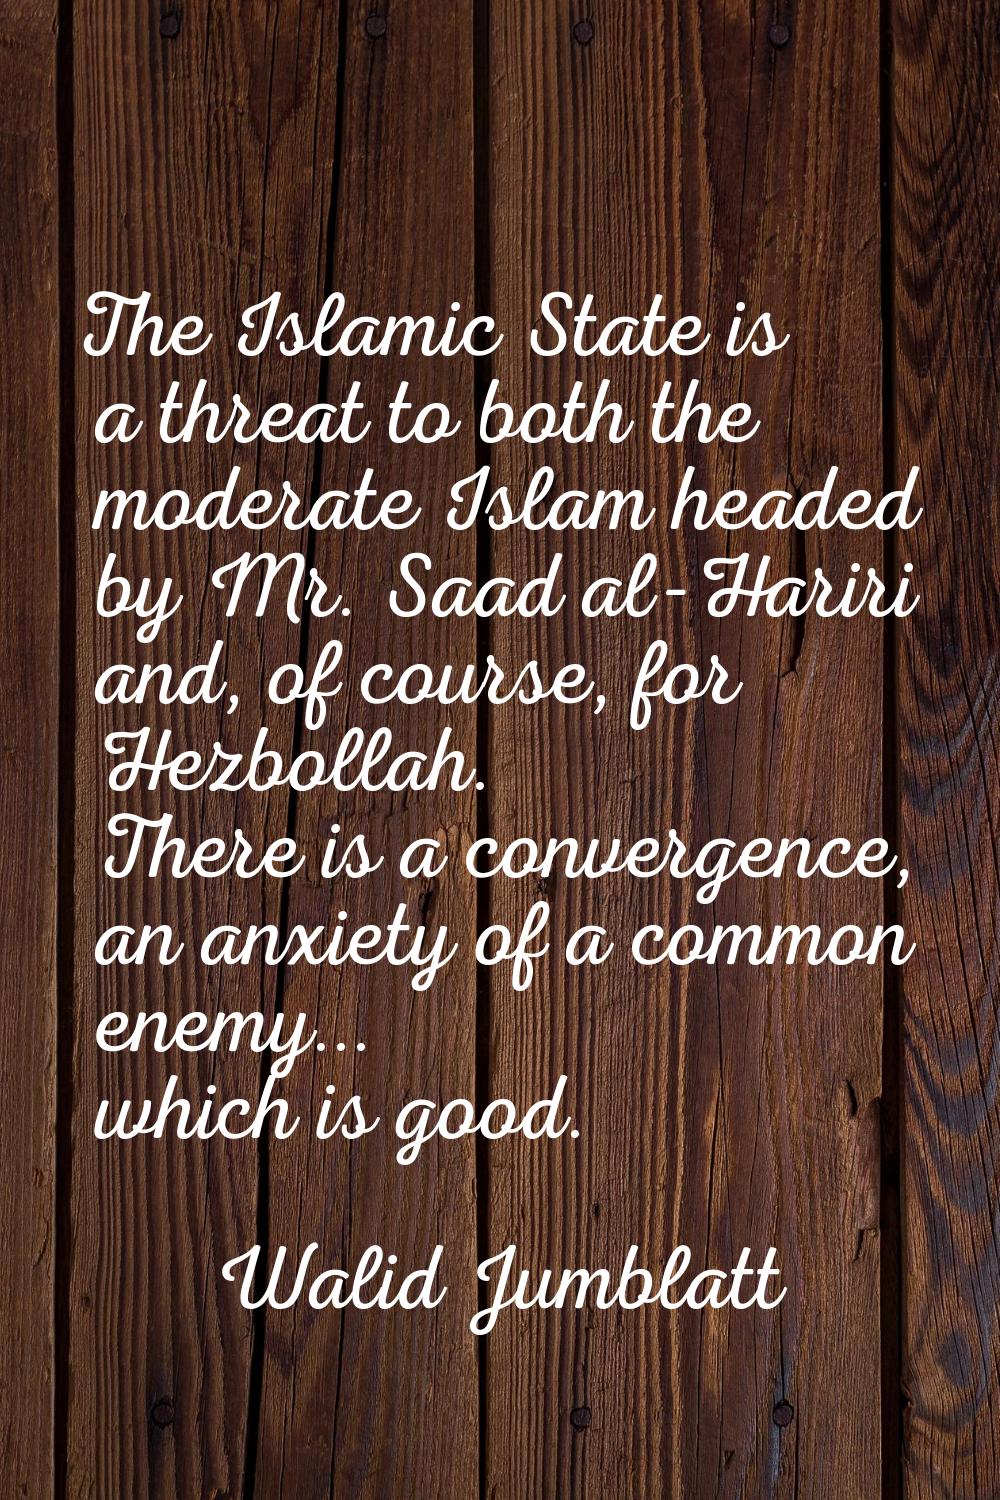 The Islamic State is a threat to both the moderate Islam headed by Mr. Saad al-Hariri and, of cours